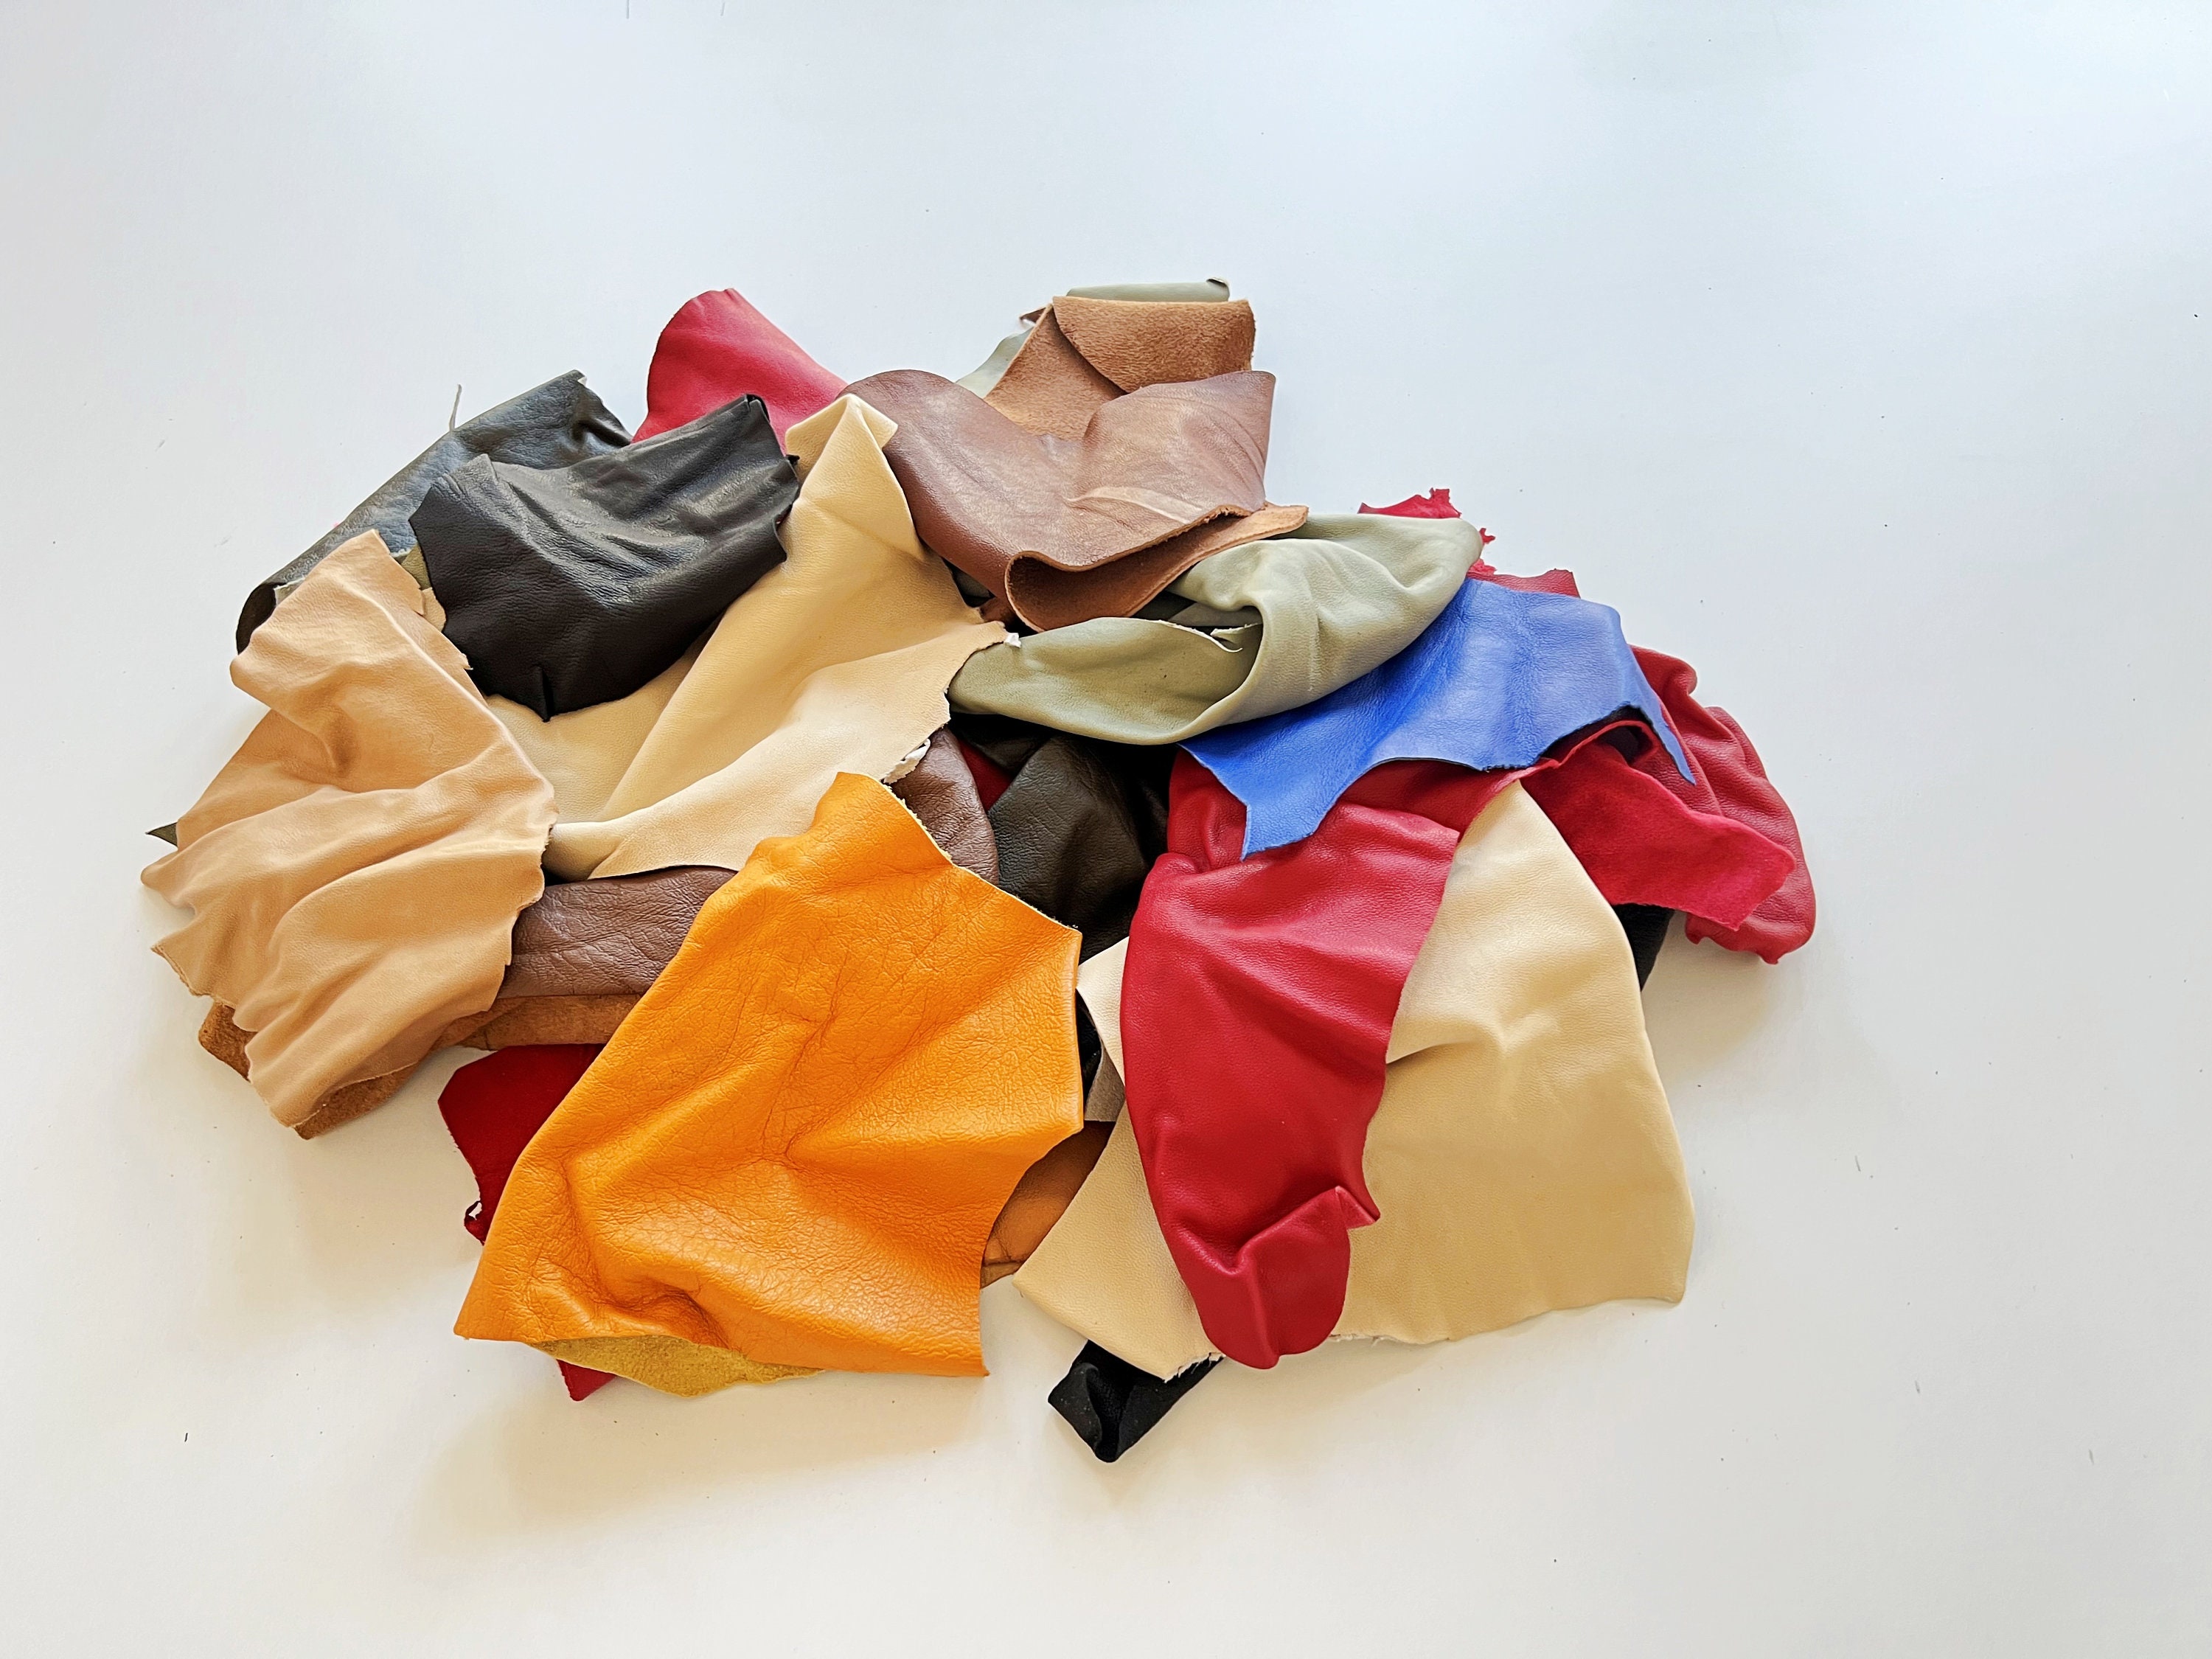 13 Pounds plus of thin (2 to 5 oz) Assorted Upholstery Leather Scraps.